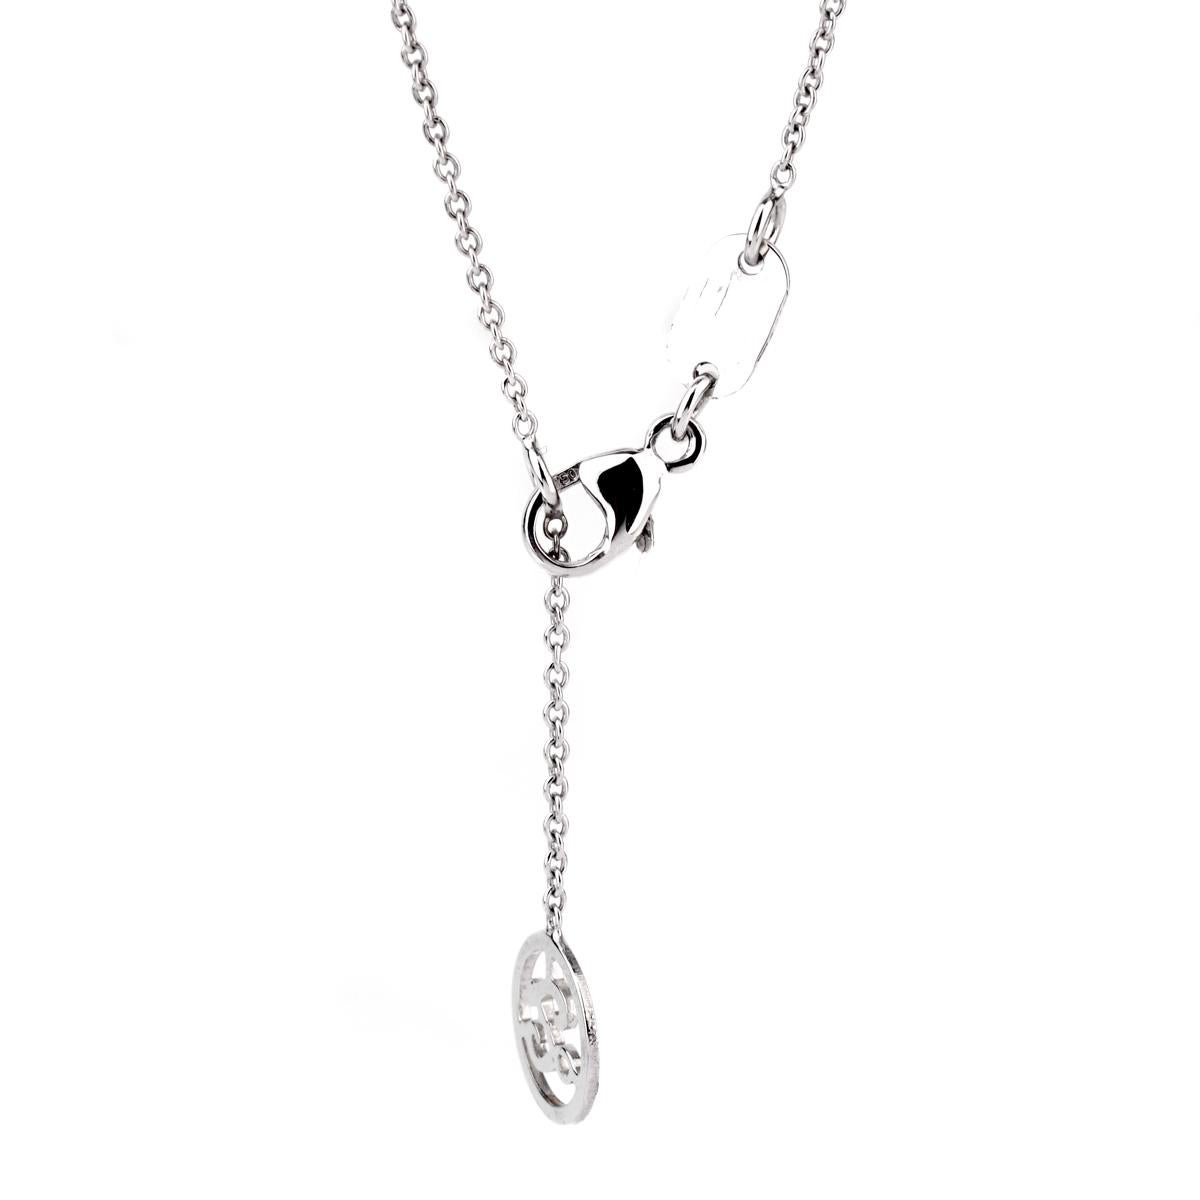 A fabulous Zoccai necklace featuring a moon motif paved with round brilliant cut diamonds in 18k white gold. The pendant is suspended by an 18k white gold 16